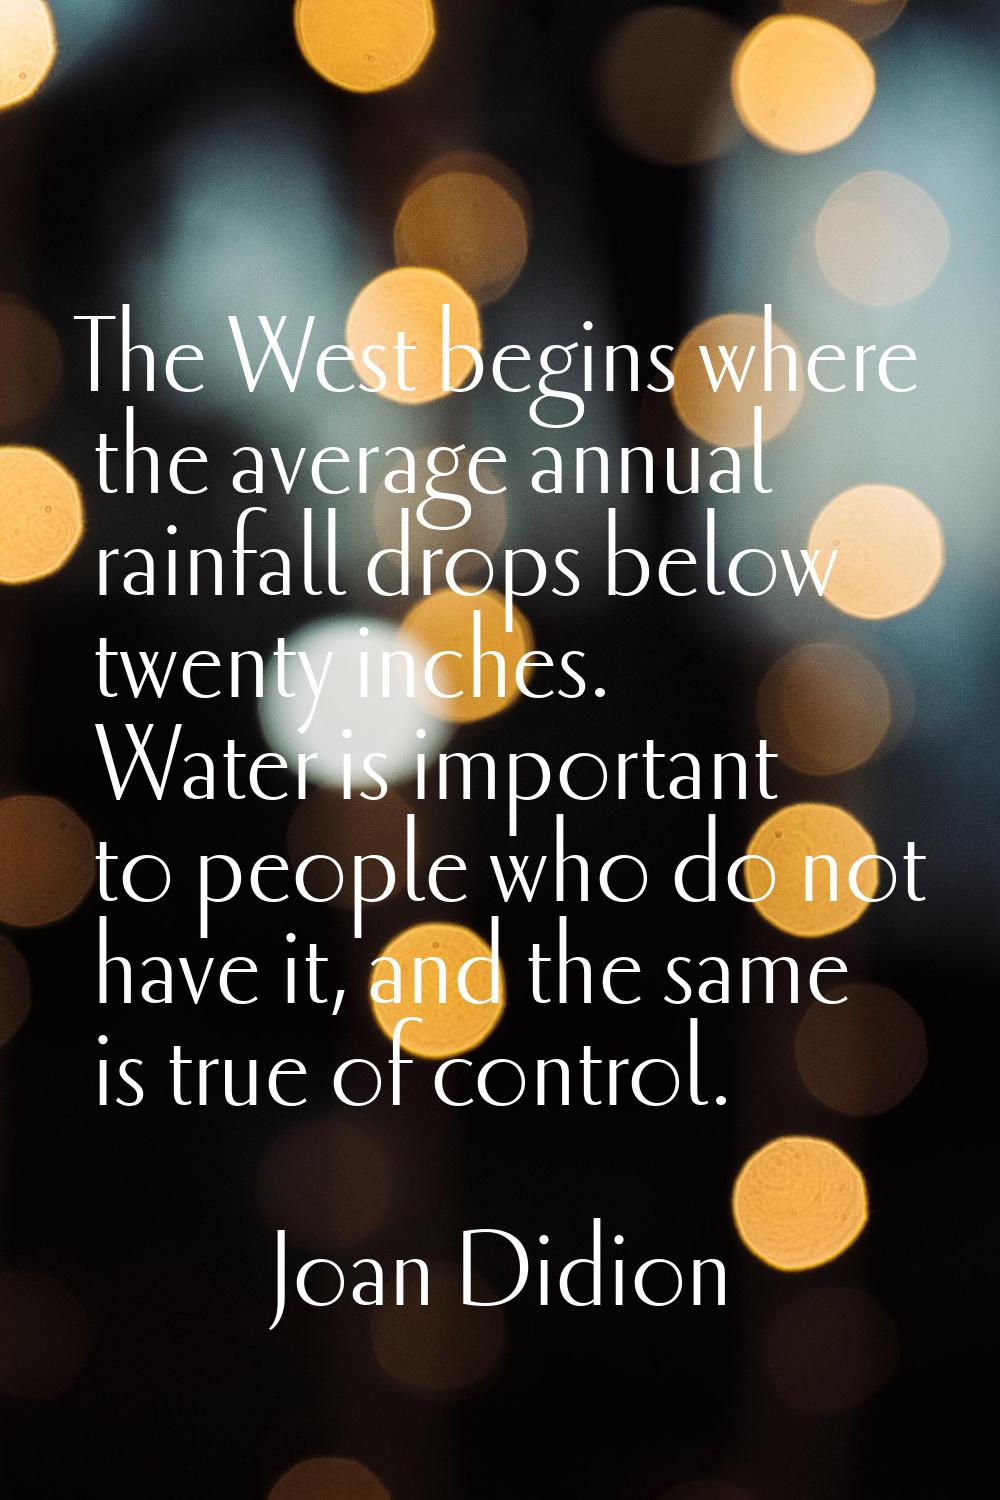 The West begins where the average annual rainfall drops below twenty inches. Water is important to 